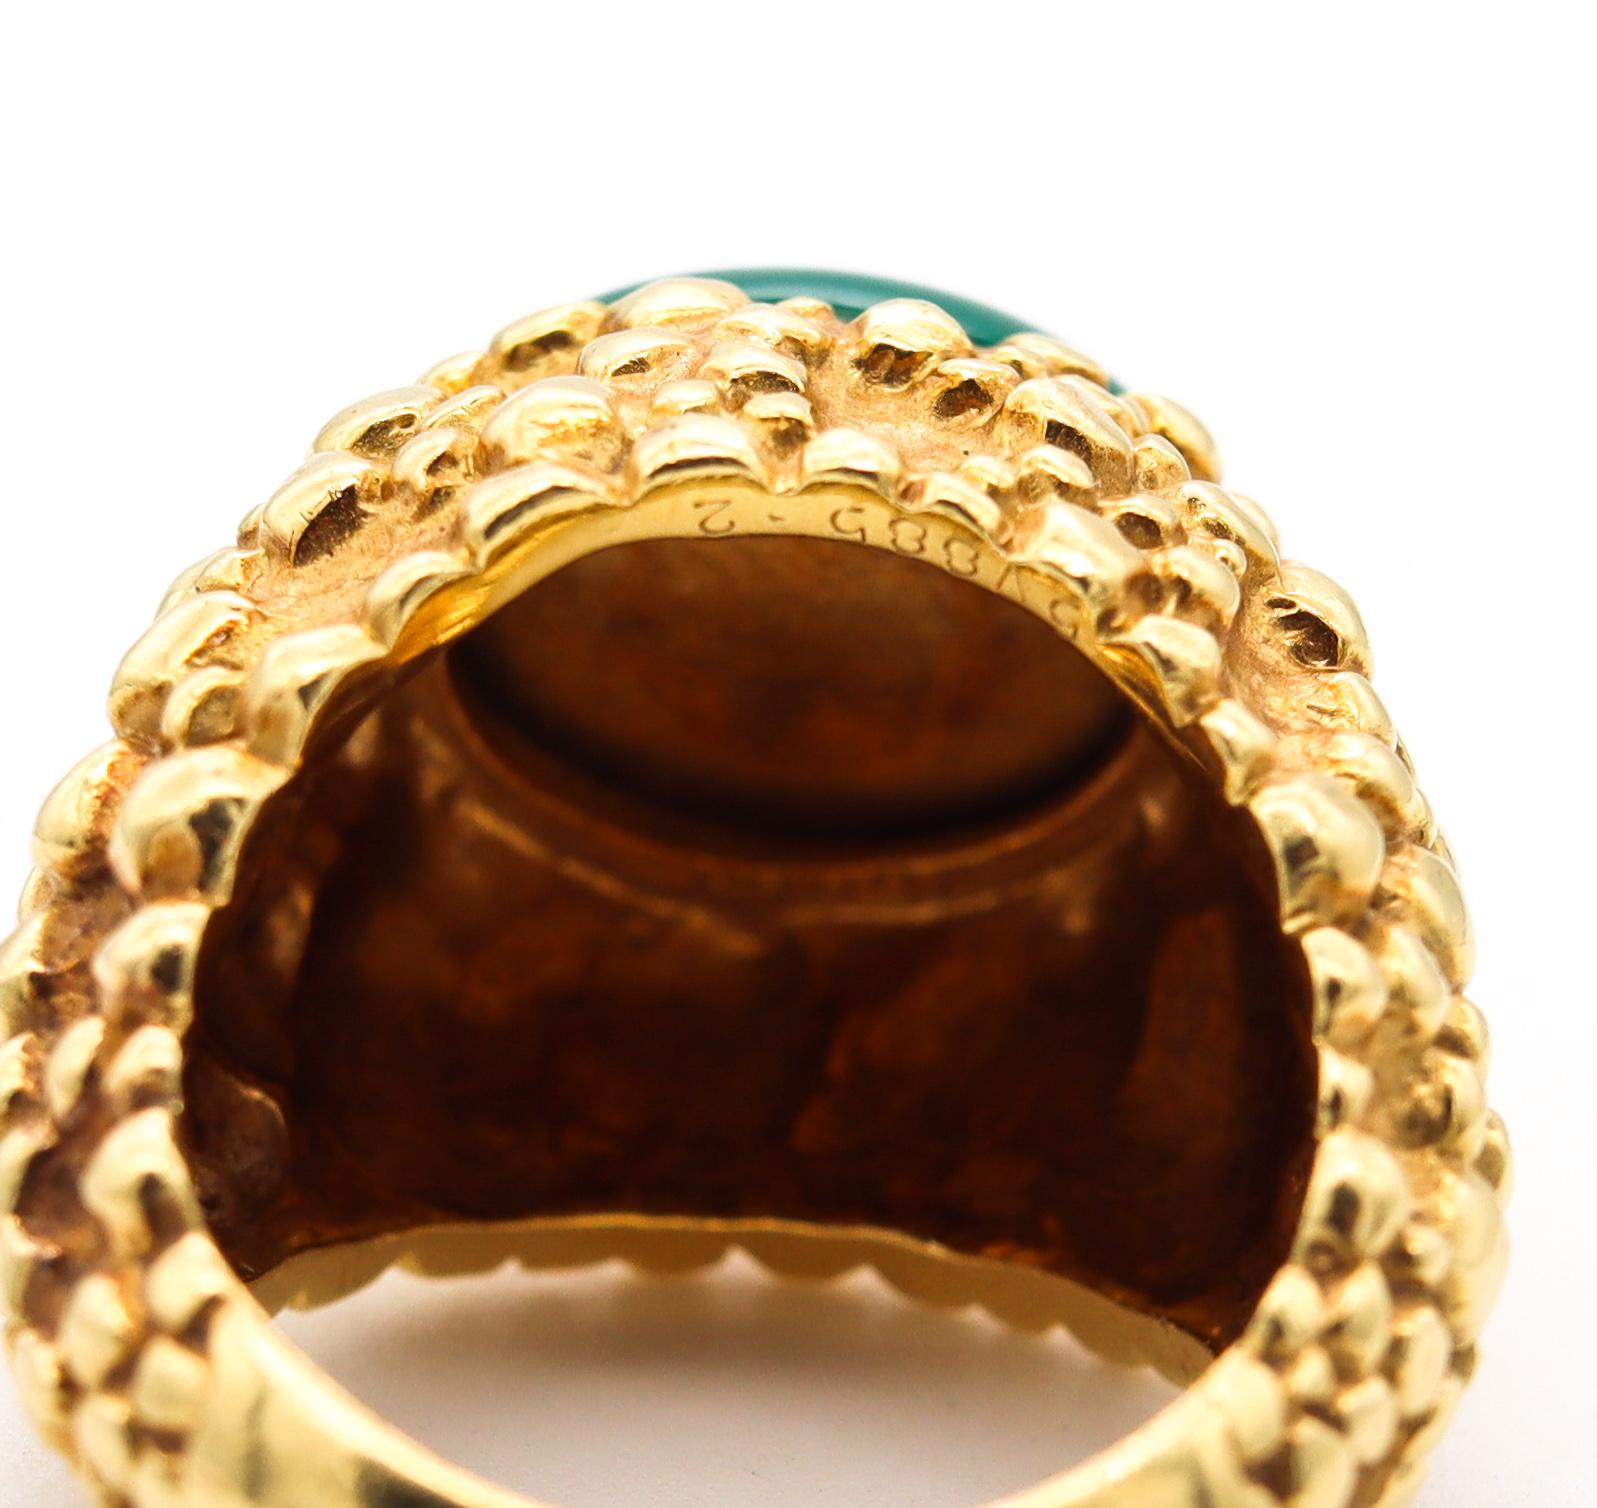 Van Cleef & Arpels 1970 Paris Cocktail Ring 18kt Gold with 8.27 Cts Chrysoprase 1